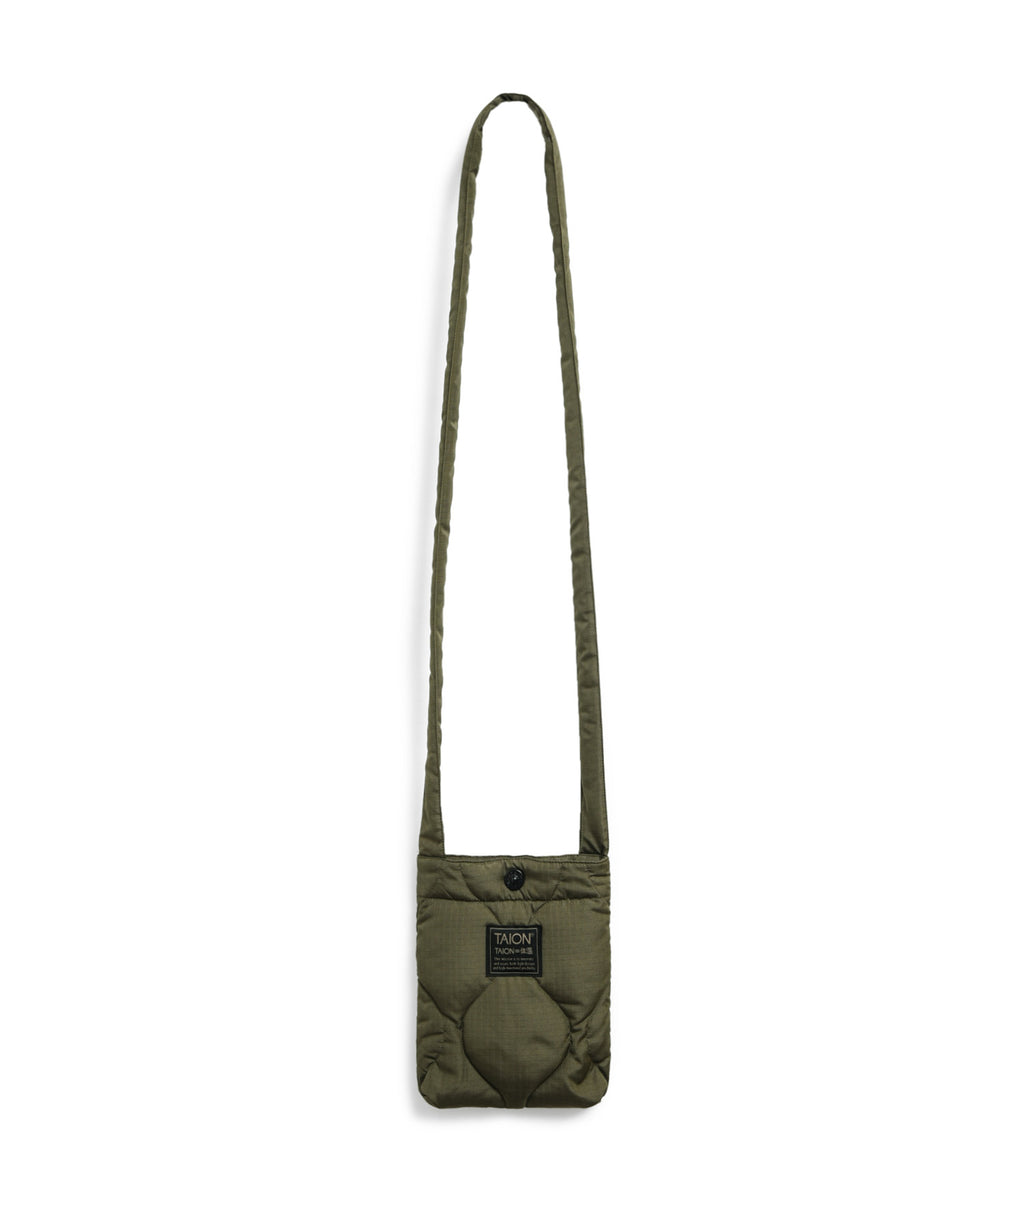 Taion Military Cross Body Down Bag Small Dark Olive